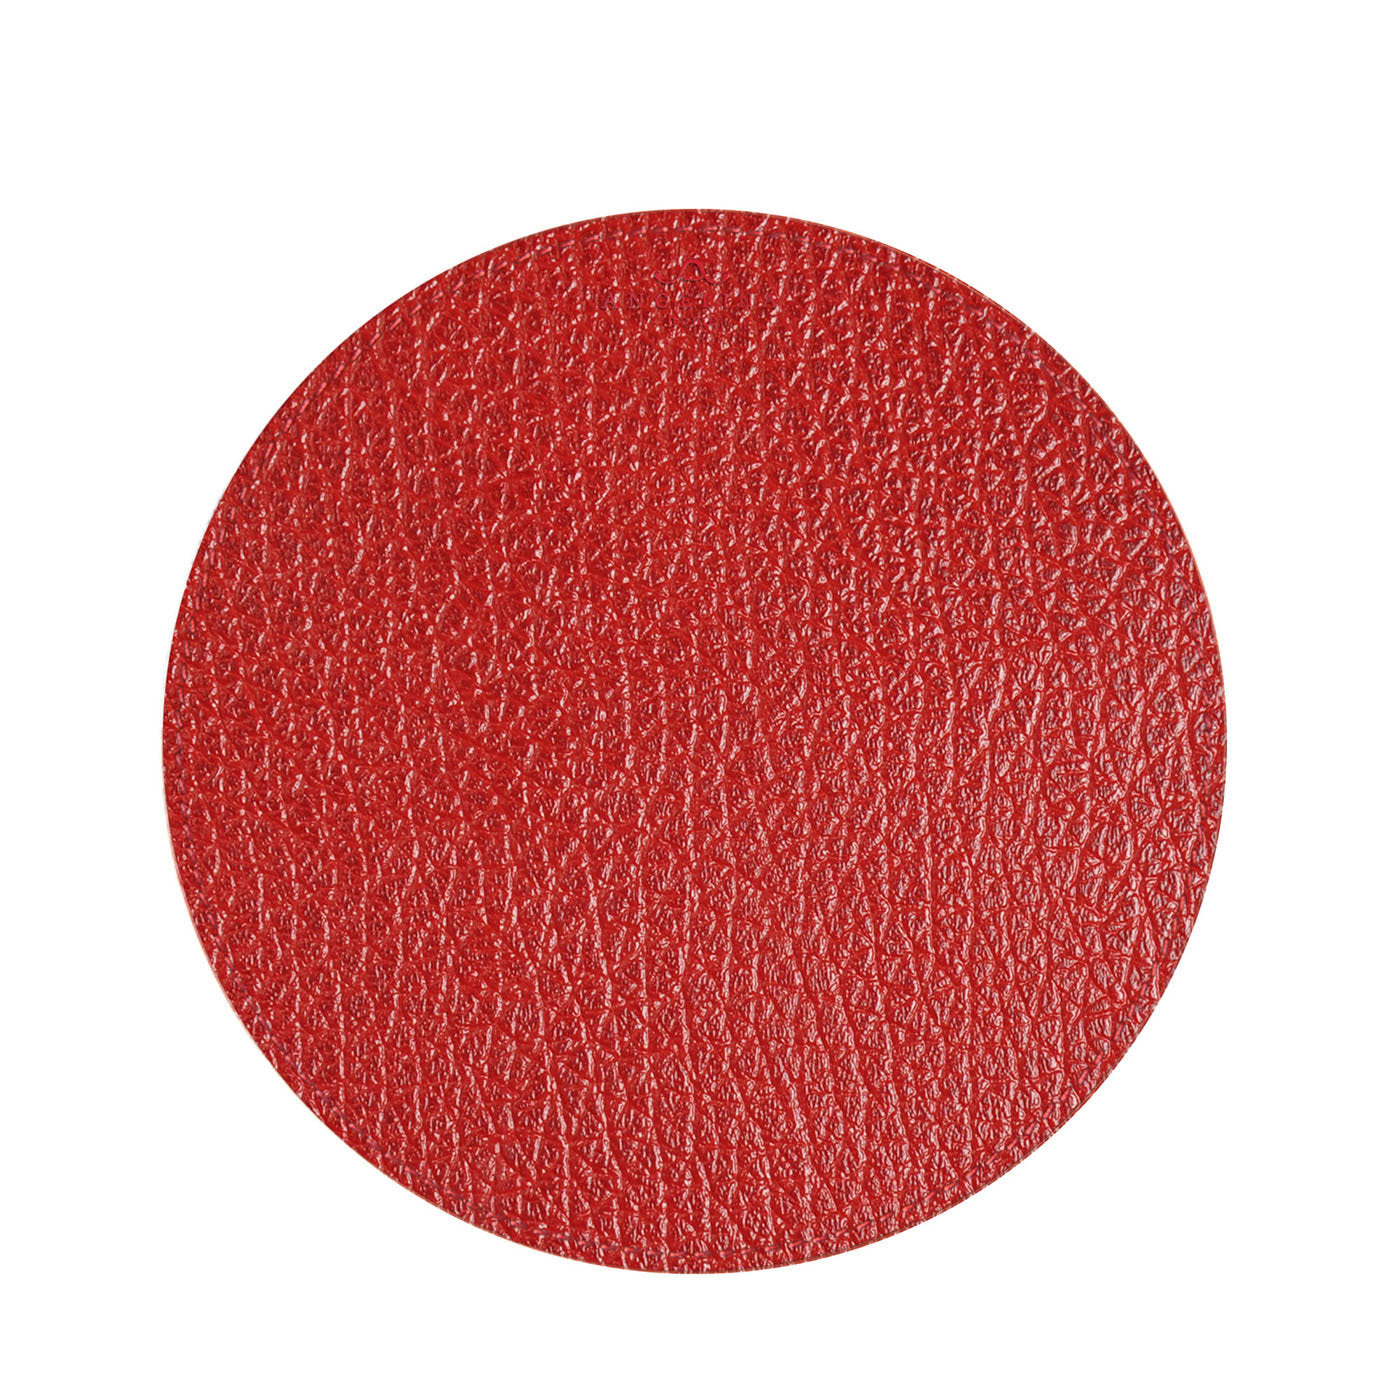 Tanzania Small Set of 2 Round Red Leather Placemats - Alternative view 1